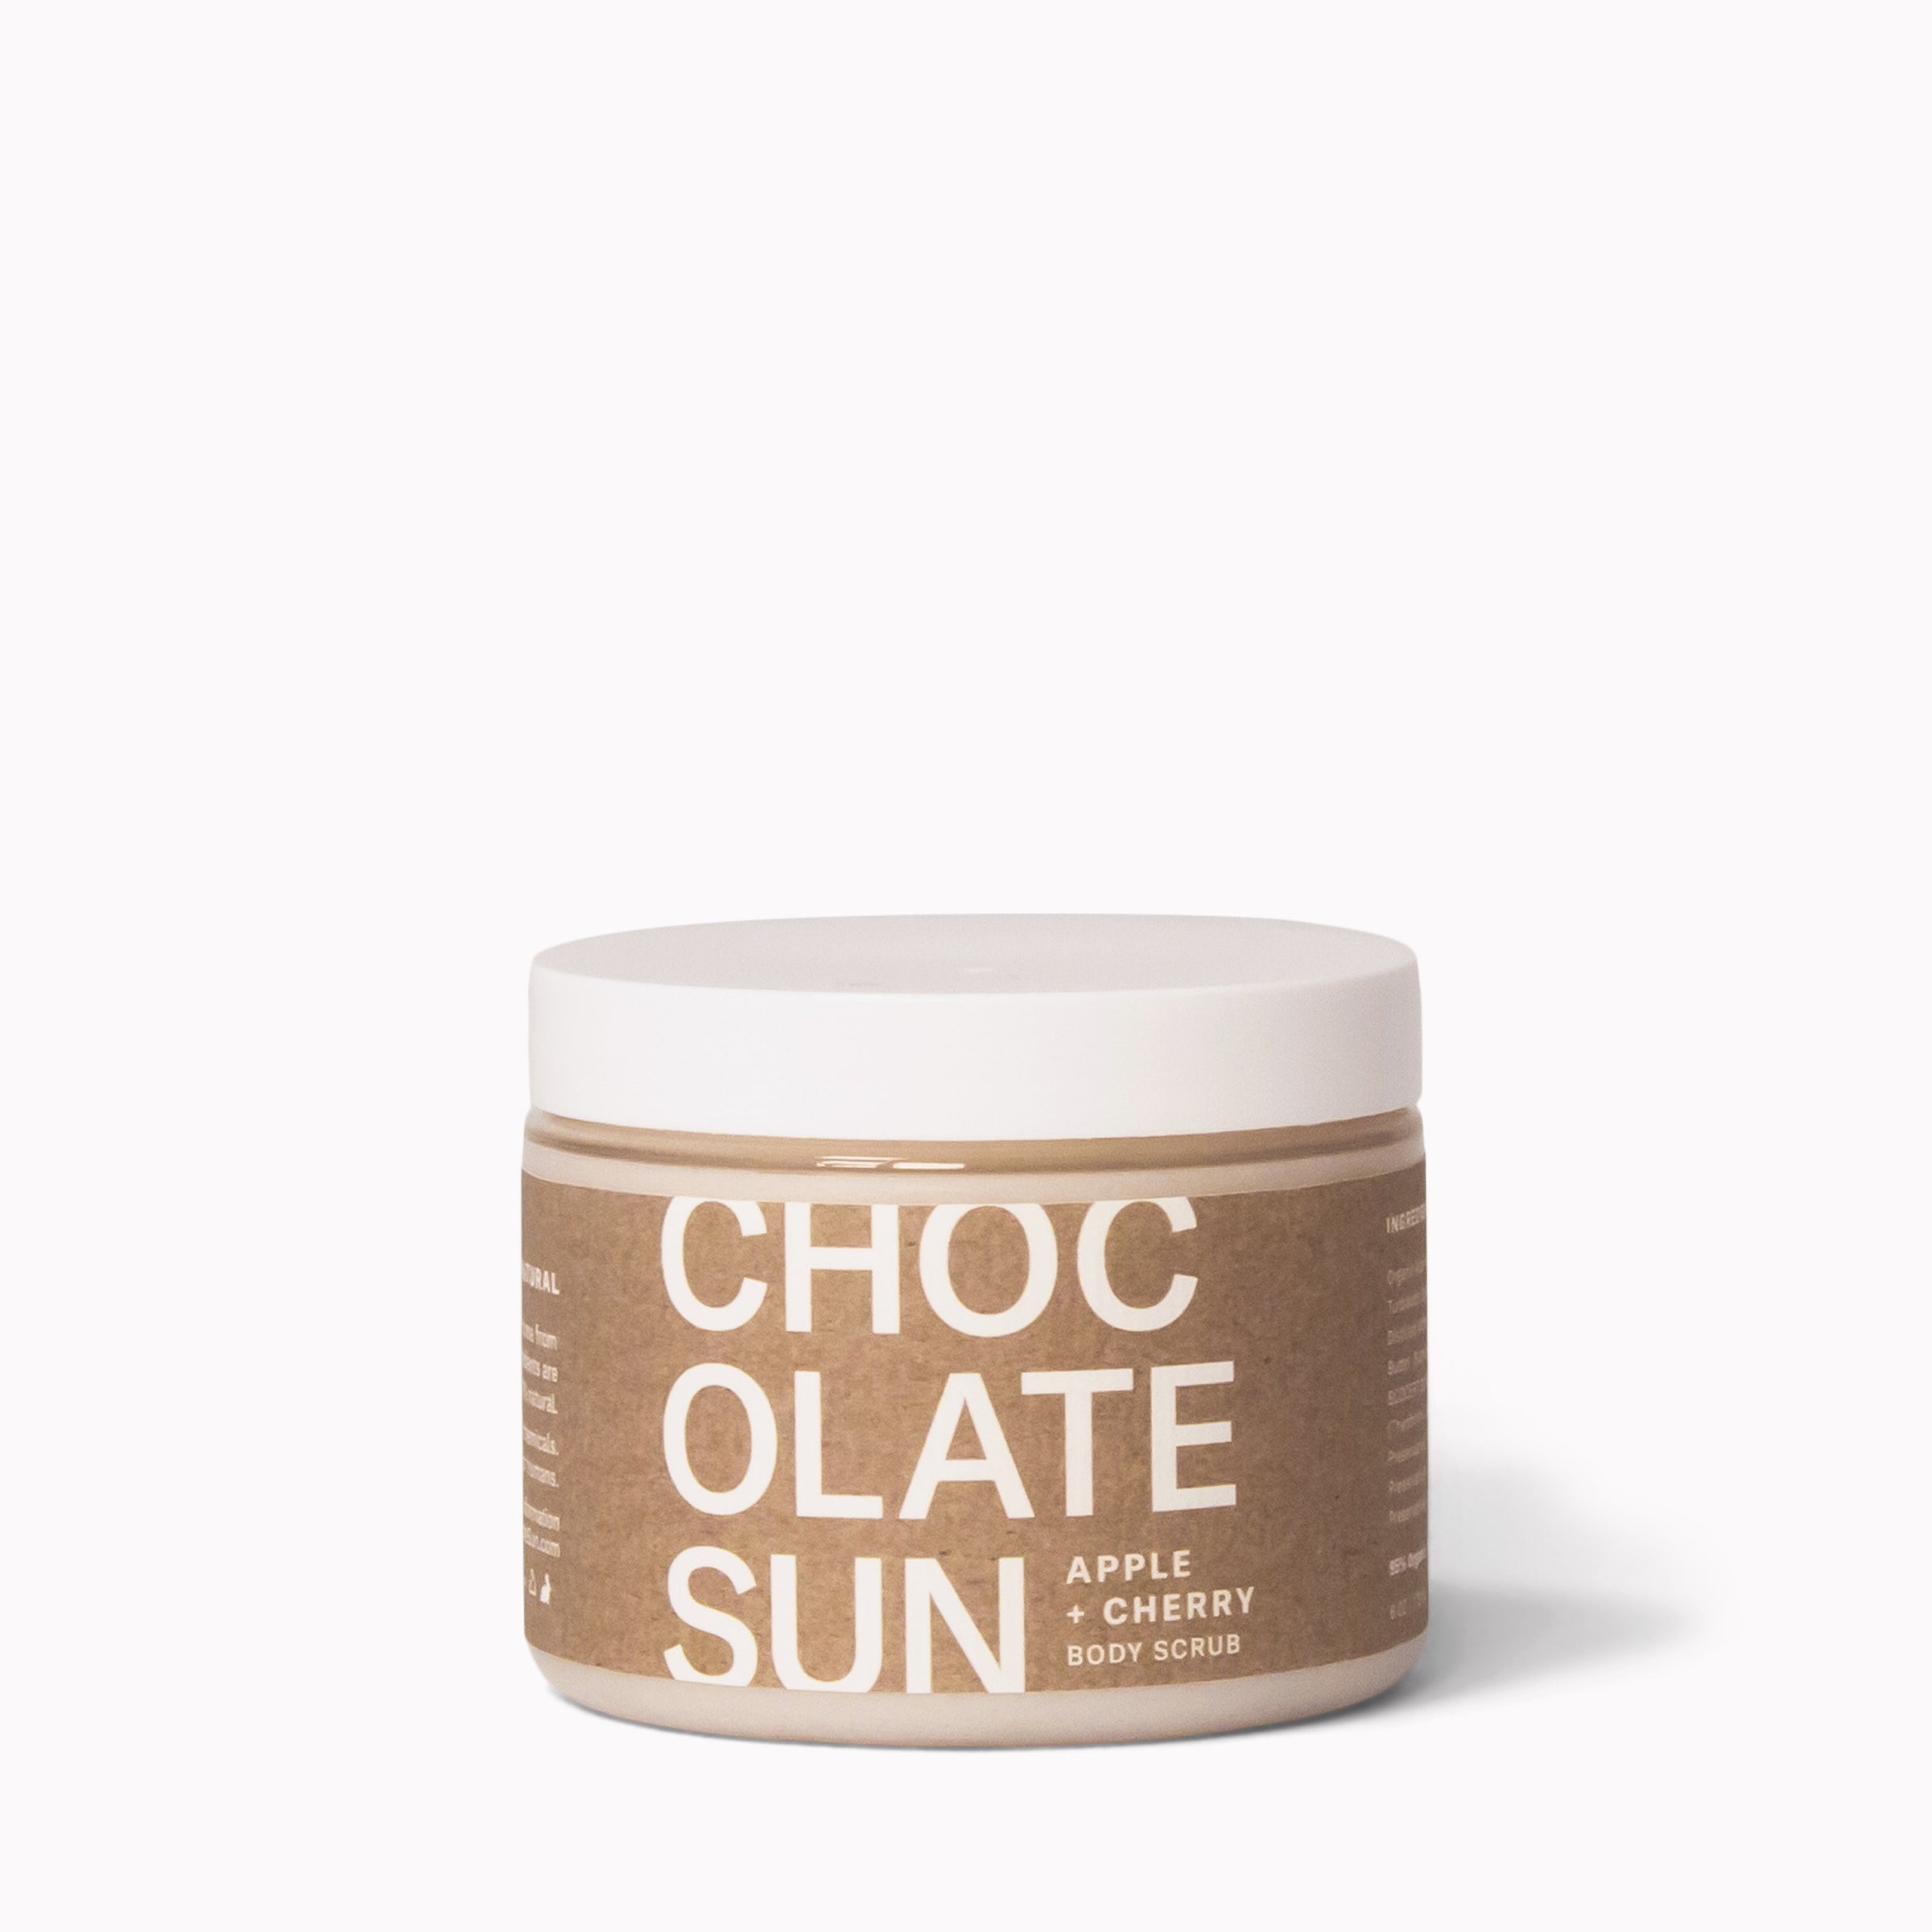 ABSOLUTE Dark Bundle - Sunless Tanning - Face + Body - Cocoa Scent